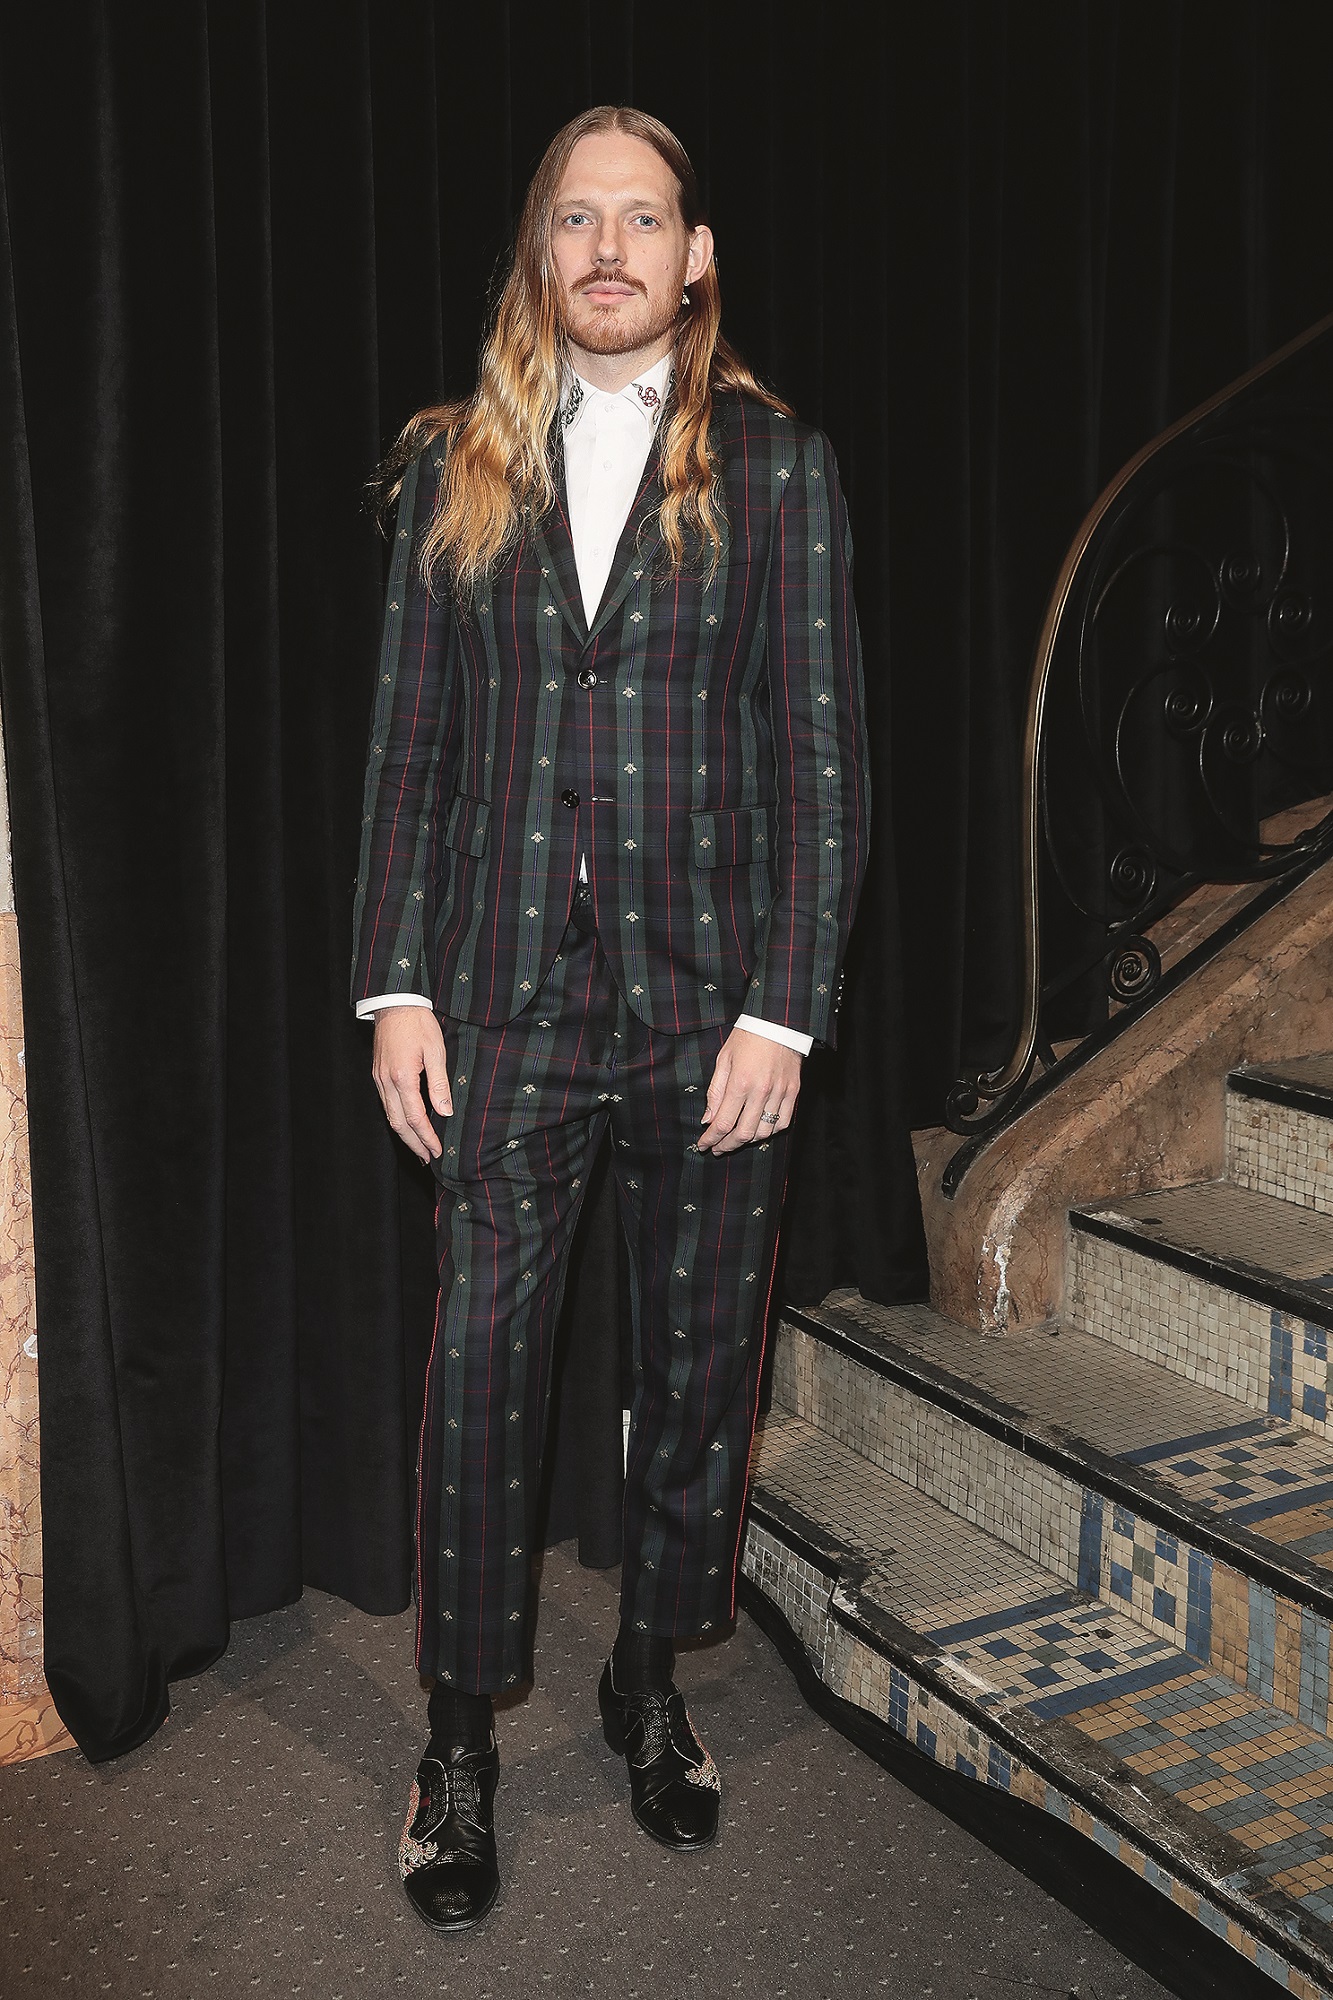 PARIS, FRANCE - SEPTEMBER 24:  James T Merry attends the Gucci show during Paris Fashion Week Spring/Summer 2019 on September 24, 2018 in Paris, France.  (Photo by Vittorio Zunino Celotto/Getty Images for Gucci)